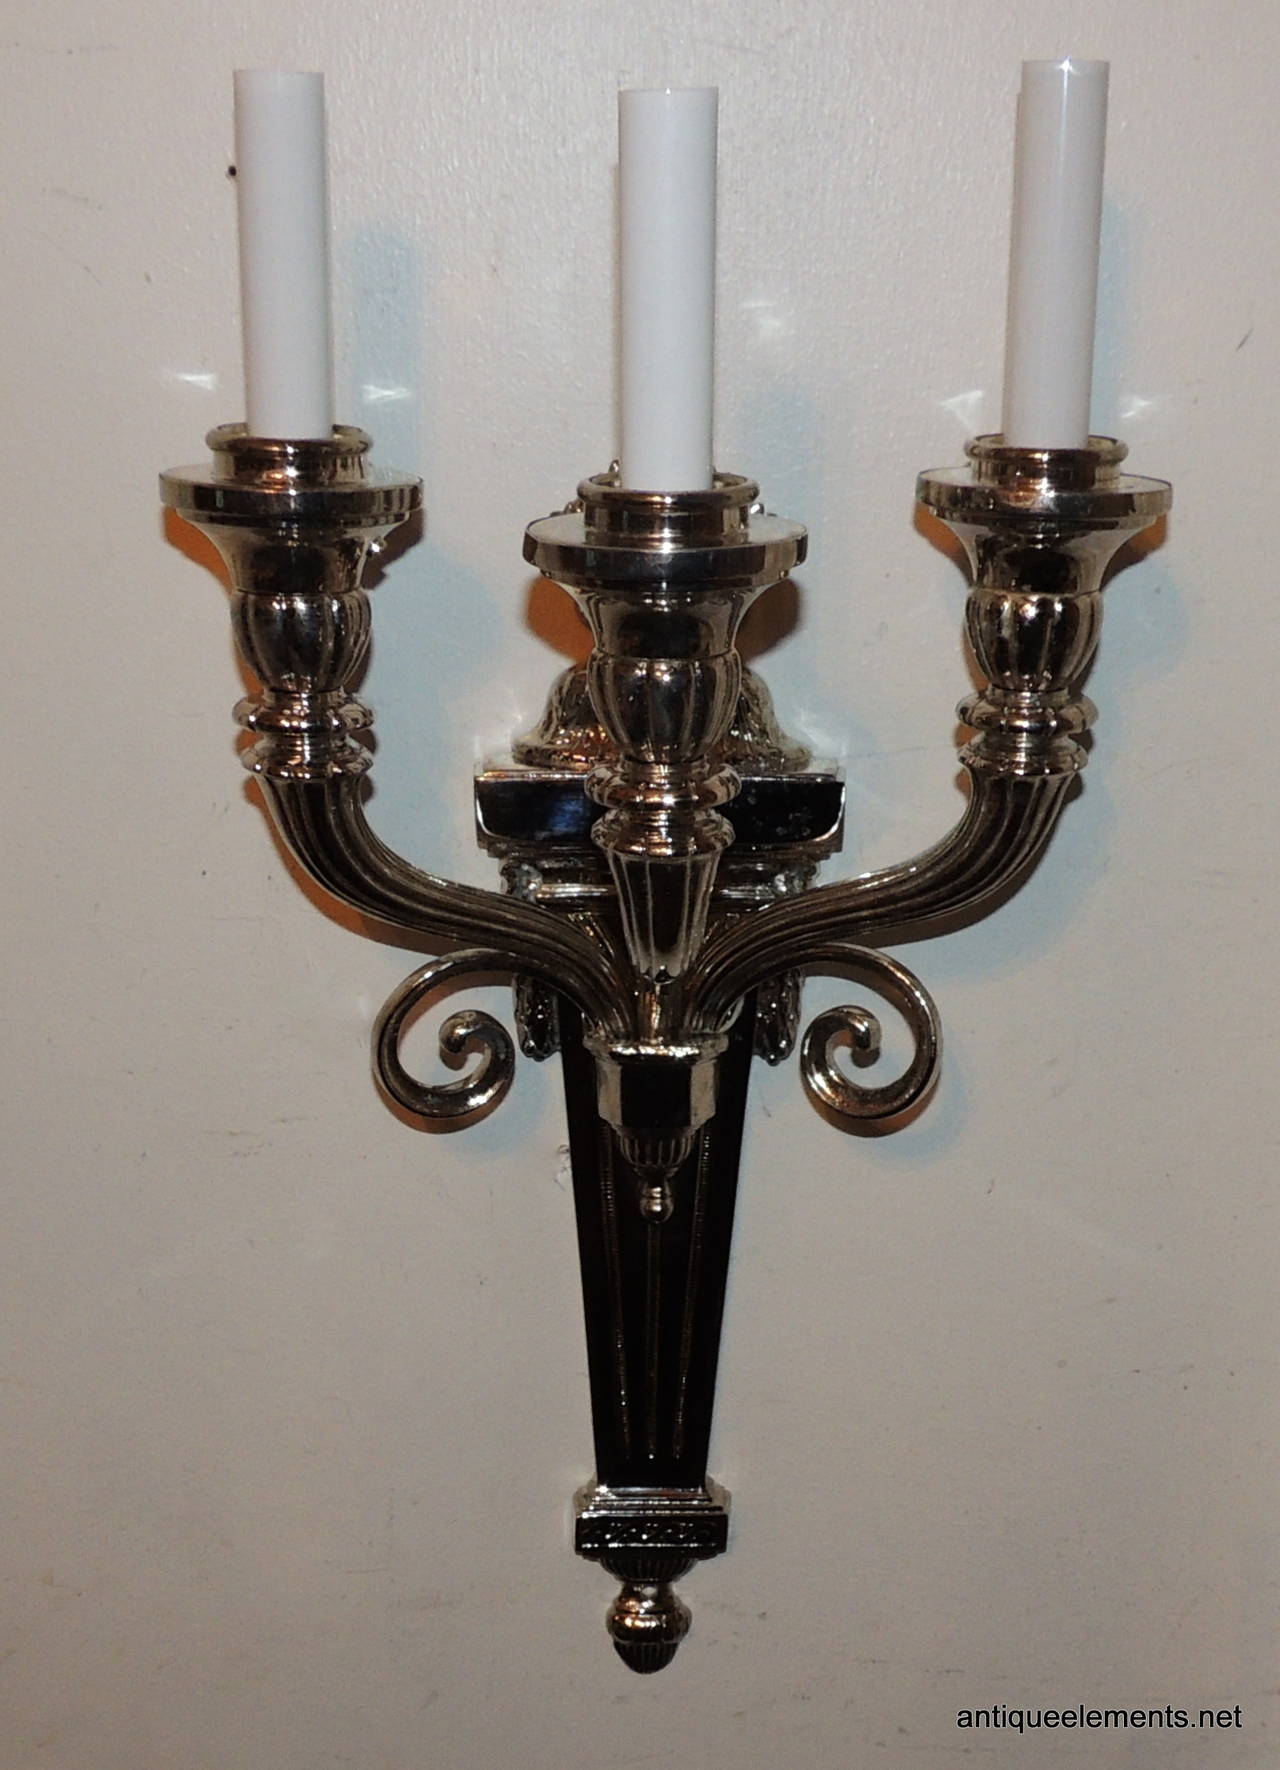 This elegant pair of neoclassical nickel-plated sconces are attributed to Caldwell. Very neoclassical in design with the linier detail through the centre and on the bobeches, the flame top and highlighted with the beautiful scroll detail. The